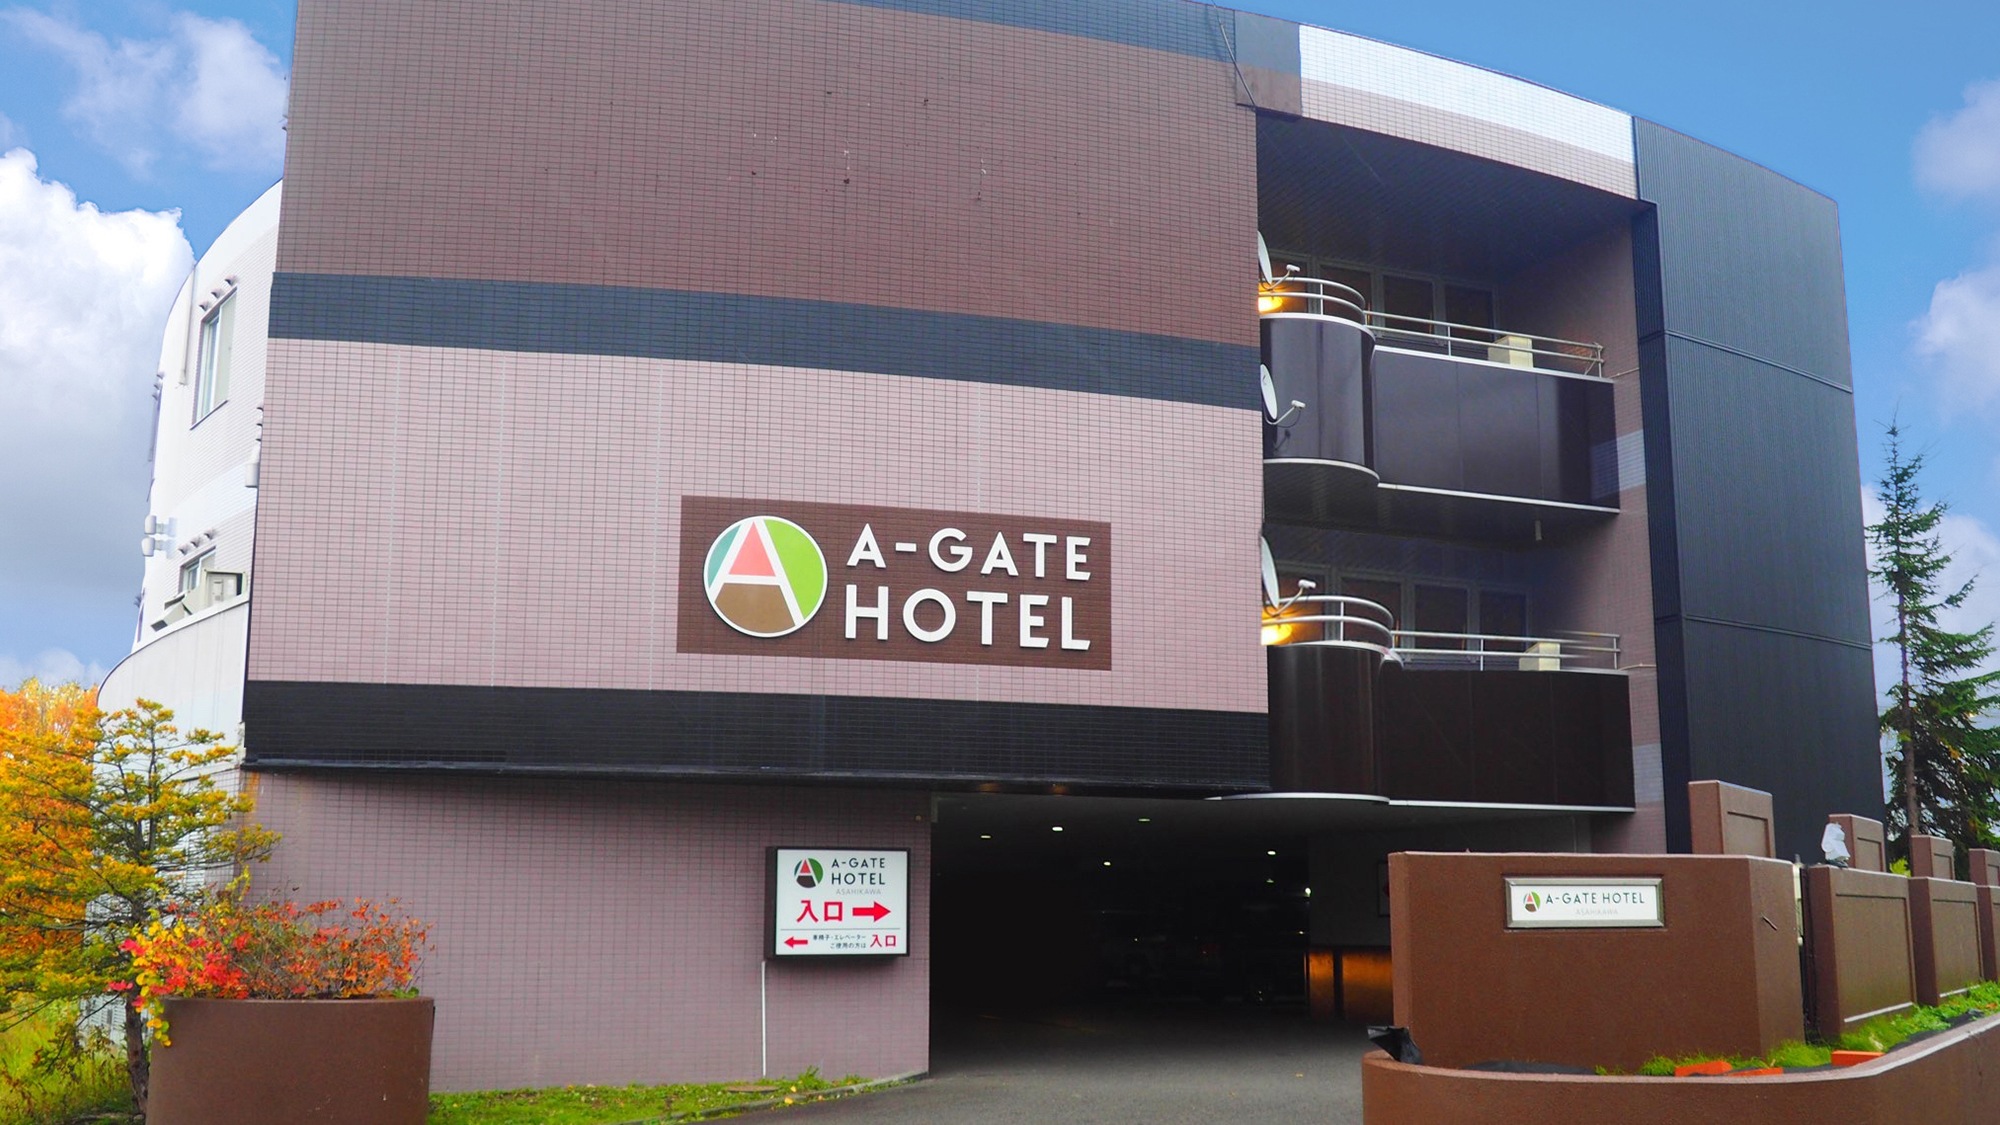 Ａ－ＧＡＴＥ　ＨＯＴＥＬ　旭川 その1